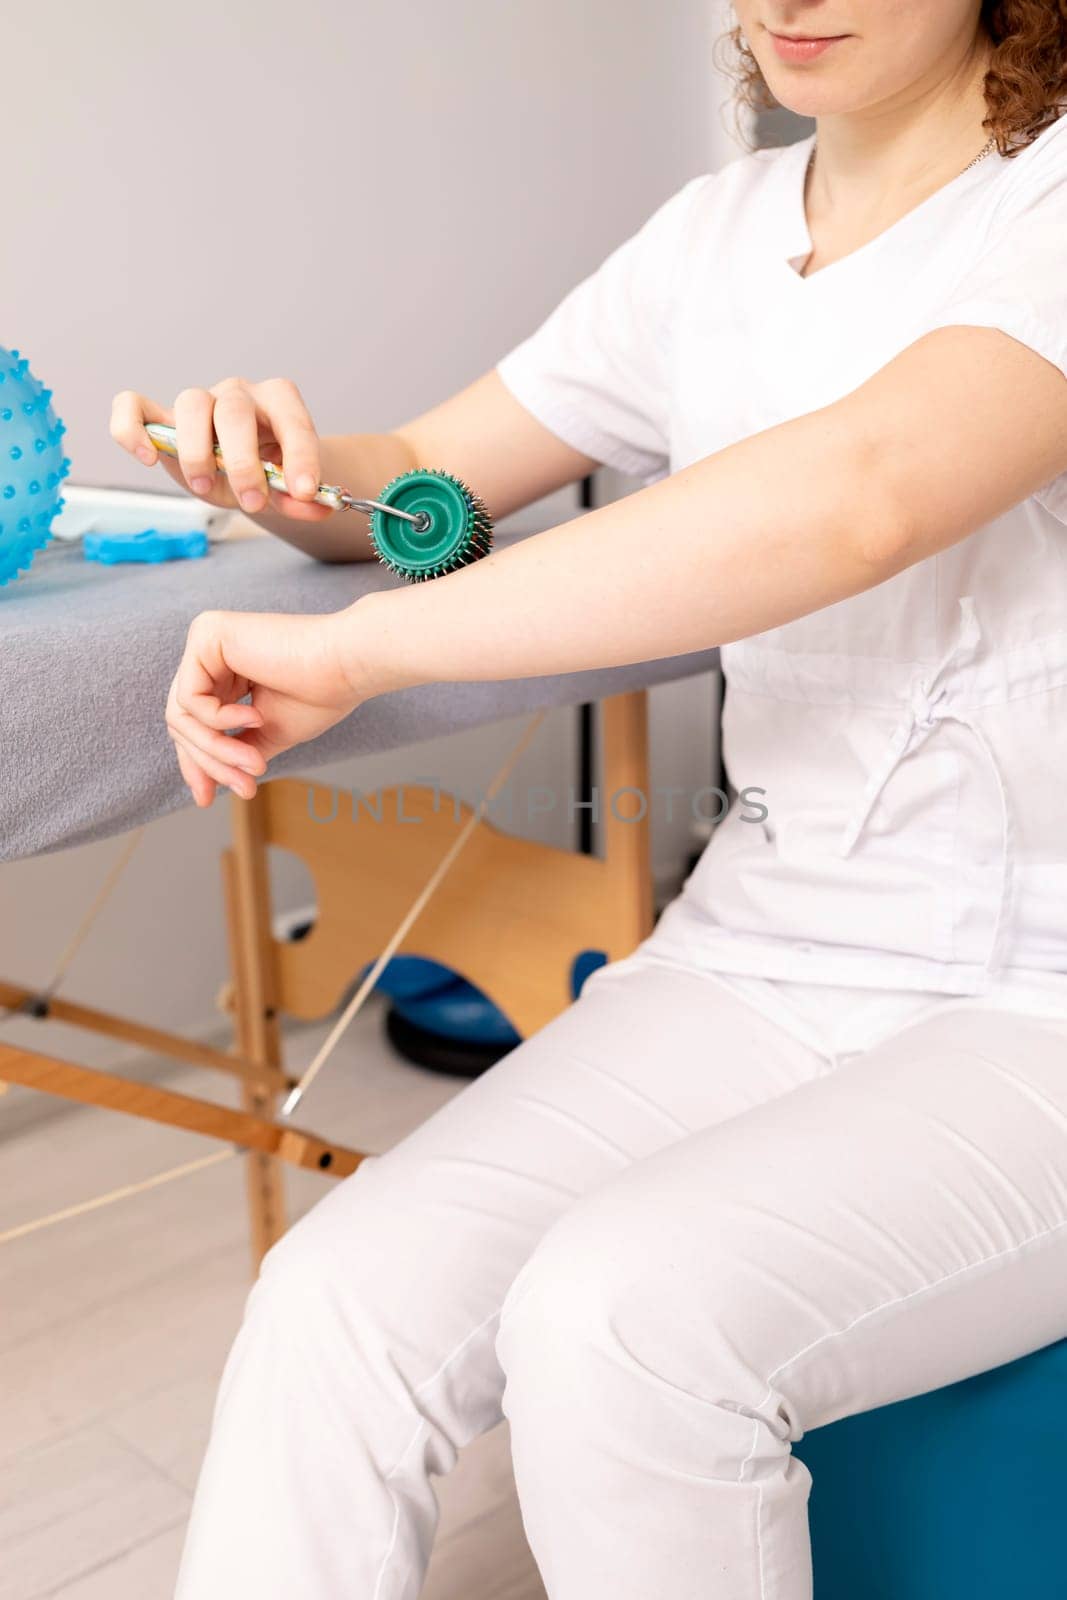 Rehabilitation Specialist, Physical Therapist Demonstrates Rehab Tool Meso Roller With Titanium Needles On Hand, Massage Ball With Pimples in Therapeutic Room. Healthcare, Rehabilitation. Vertical.